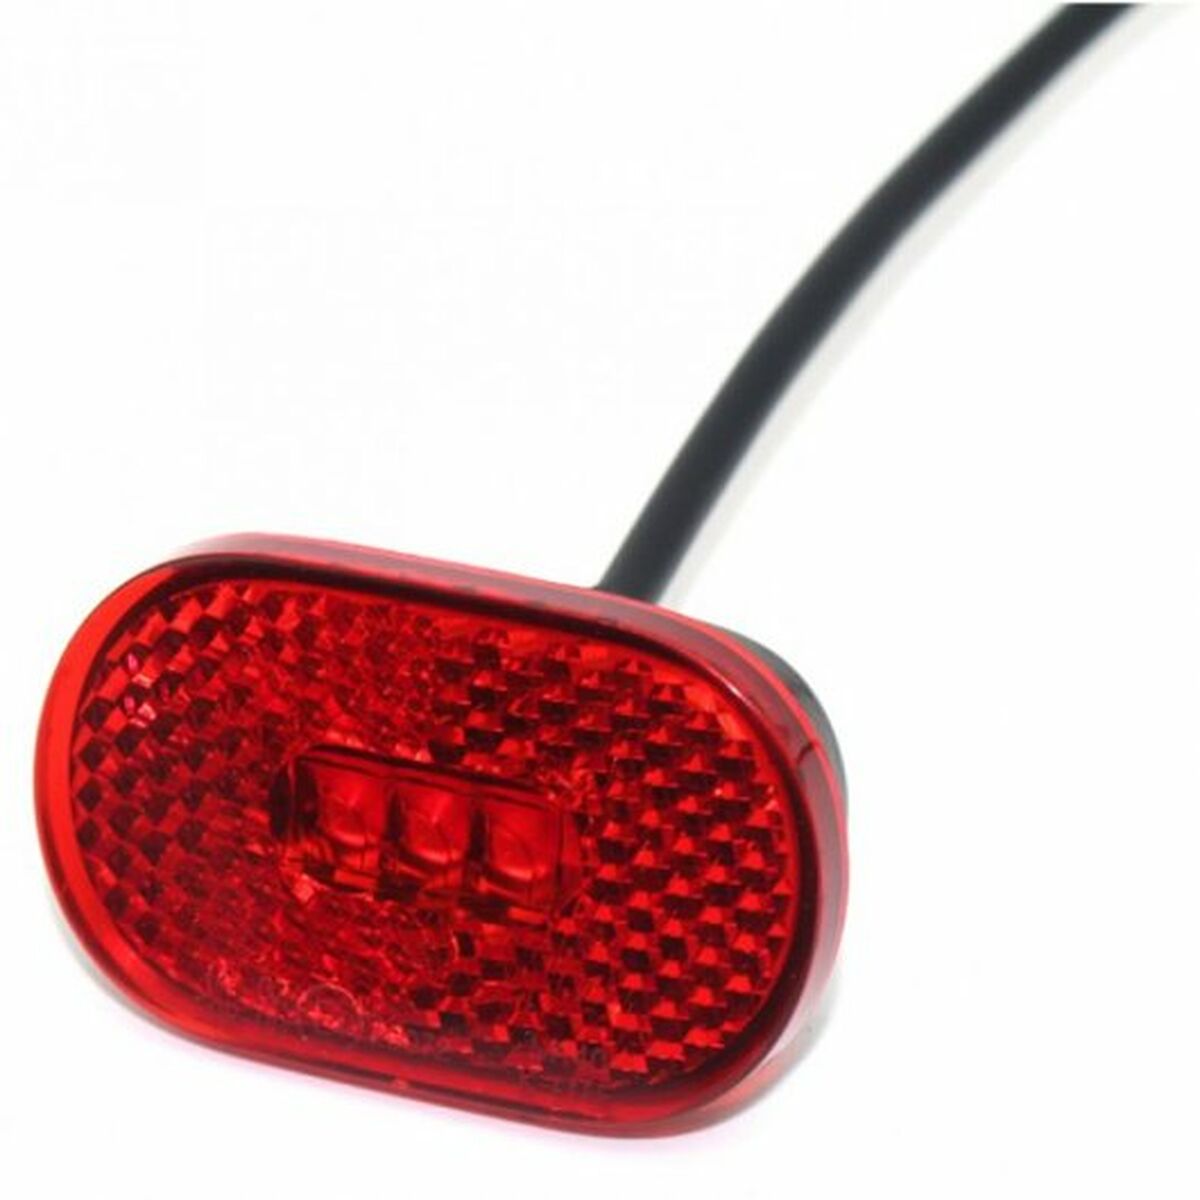 Rear brake light for scooters Xiaomi 1s, Essential, Pro, BigBuy Sport, Sports and outdoors, Urban mobility, rear-brake-light-for-scooters-xiaomi-1s-essential-pro, Brand_BigBuy Sport, category-reference-2609, category-reference-2629, category-reference-2904, category-reference-t-19681, category-reference-t-19756, category-reference-t-19876, category-reference-t-21245, Condition_NEW, deportista / en forma, Price_20 - 50, RiotNook